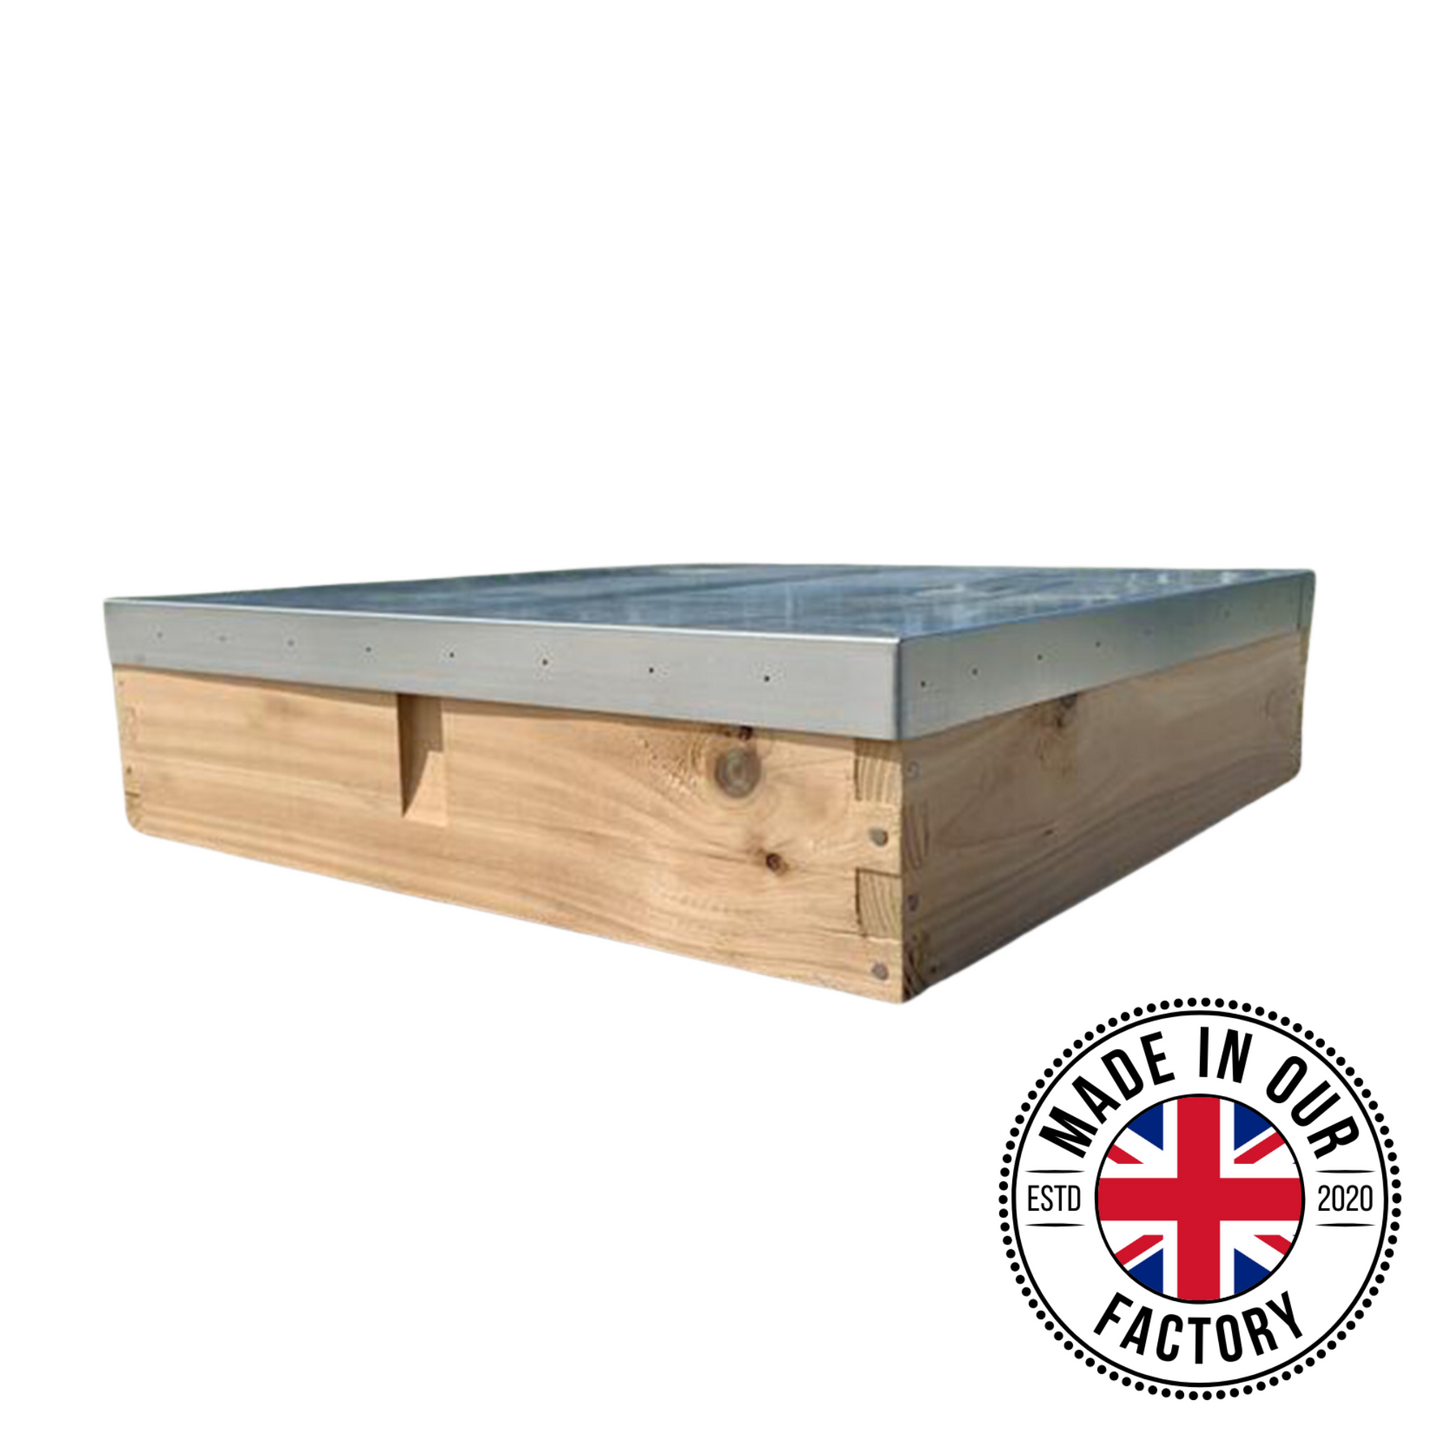 National/Commercial/14x12 Roof, Assembled, Genuine Western Red Cedar